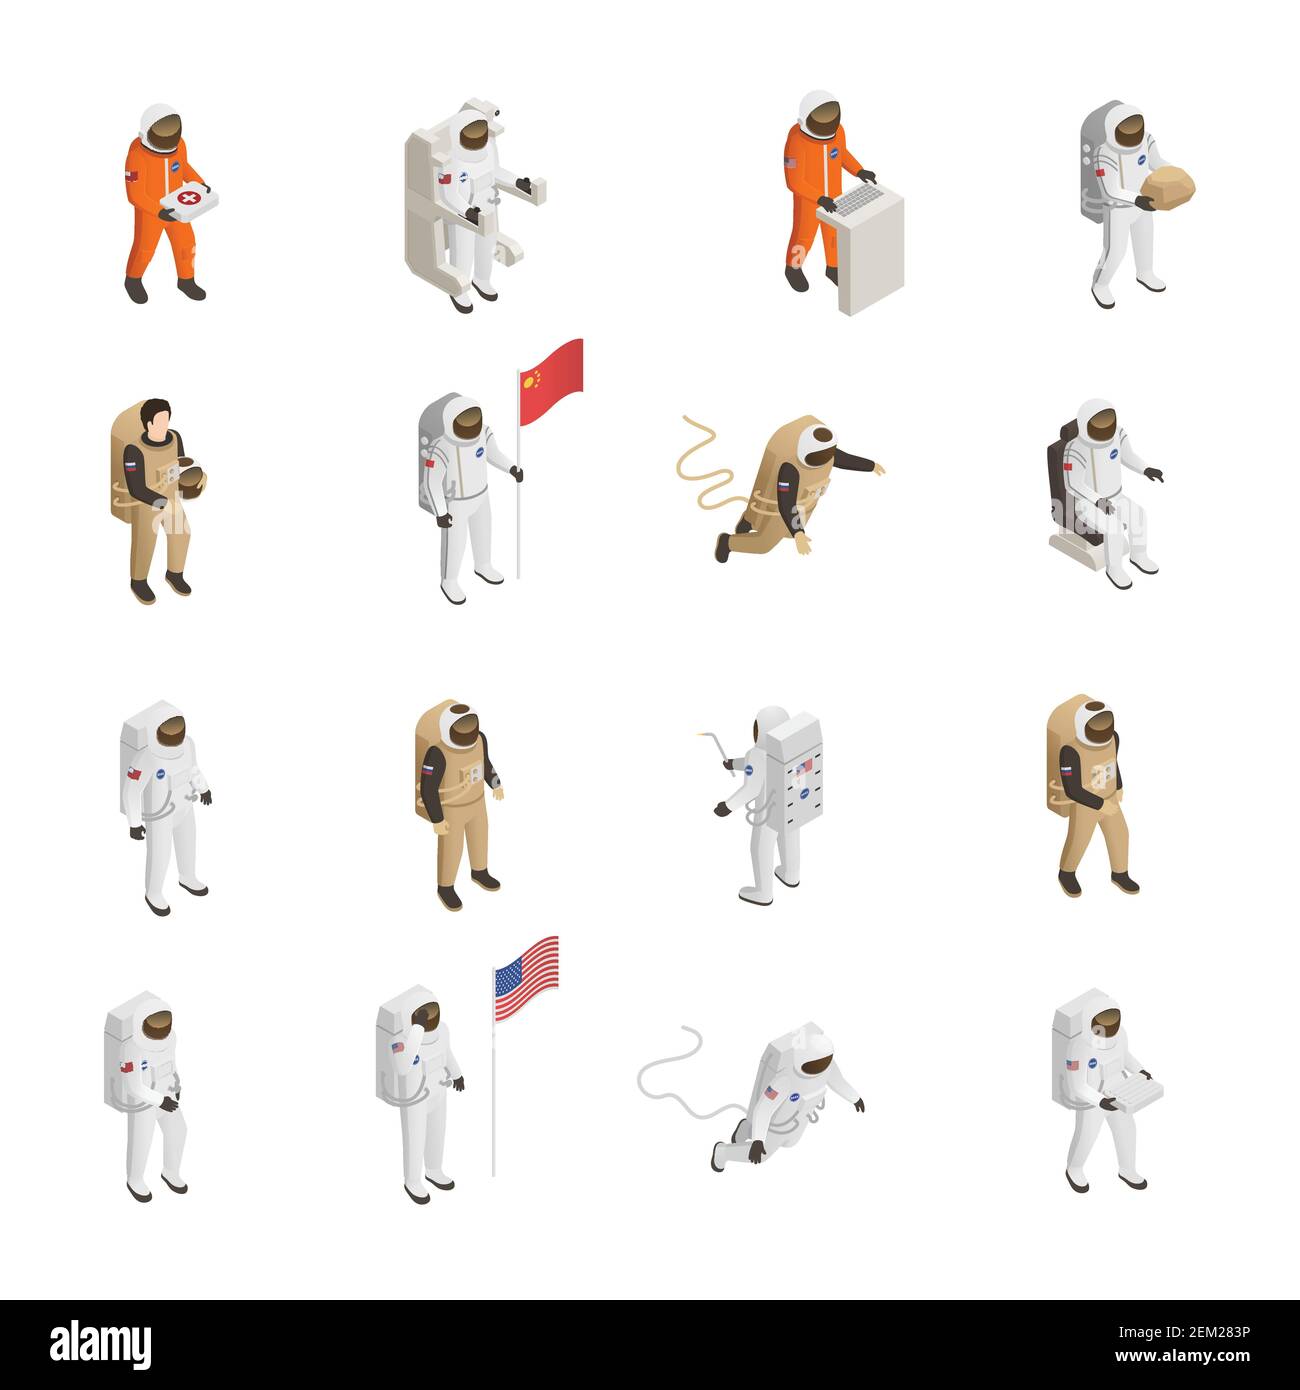 Astronauts explorers in spacesuit figures isometric icons collection with spacemen floating in outer space isolated vector illustration Stock Vector